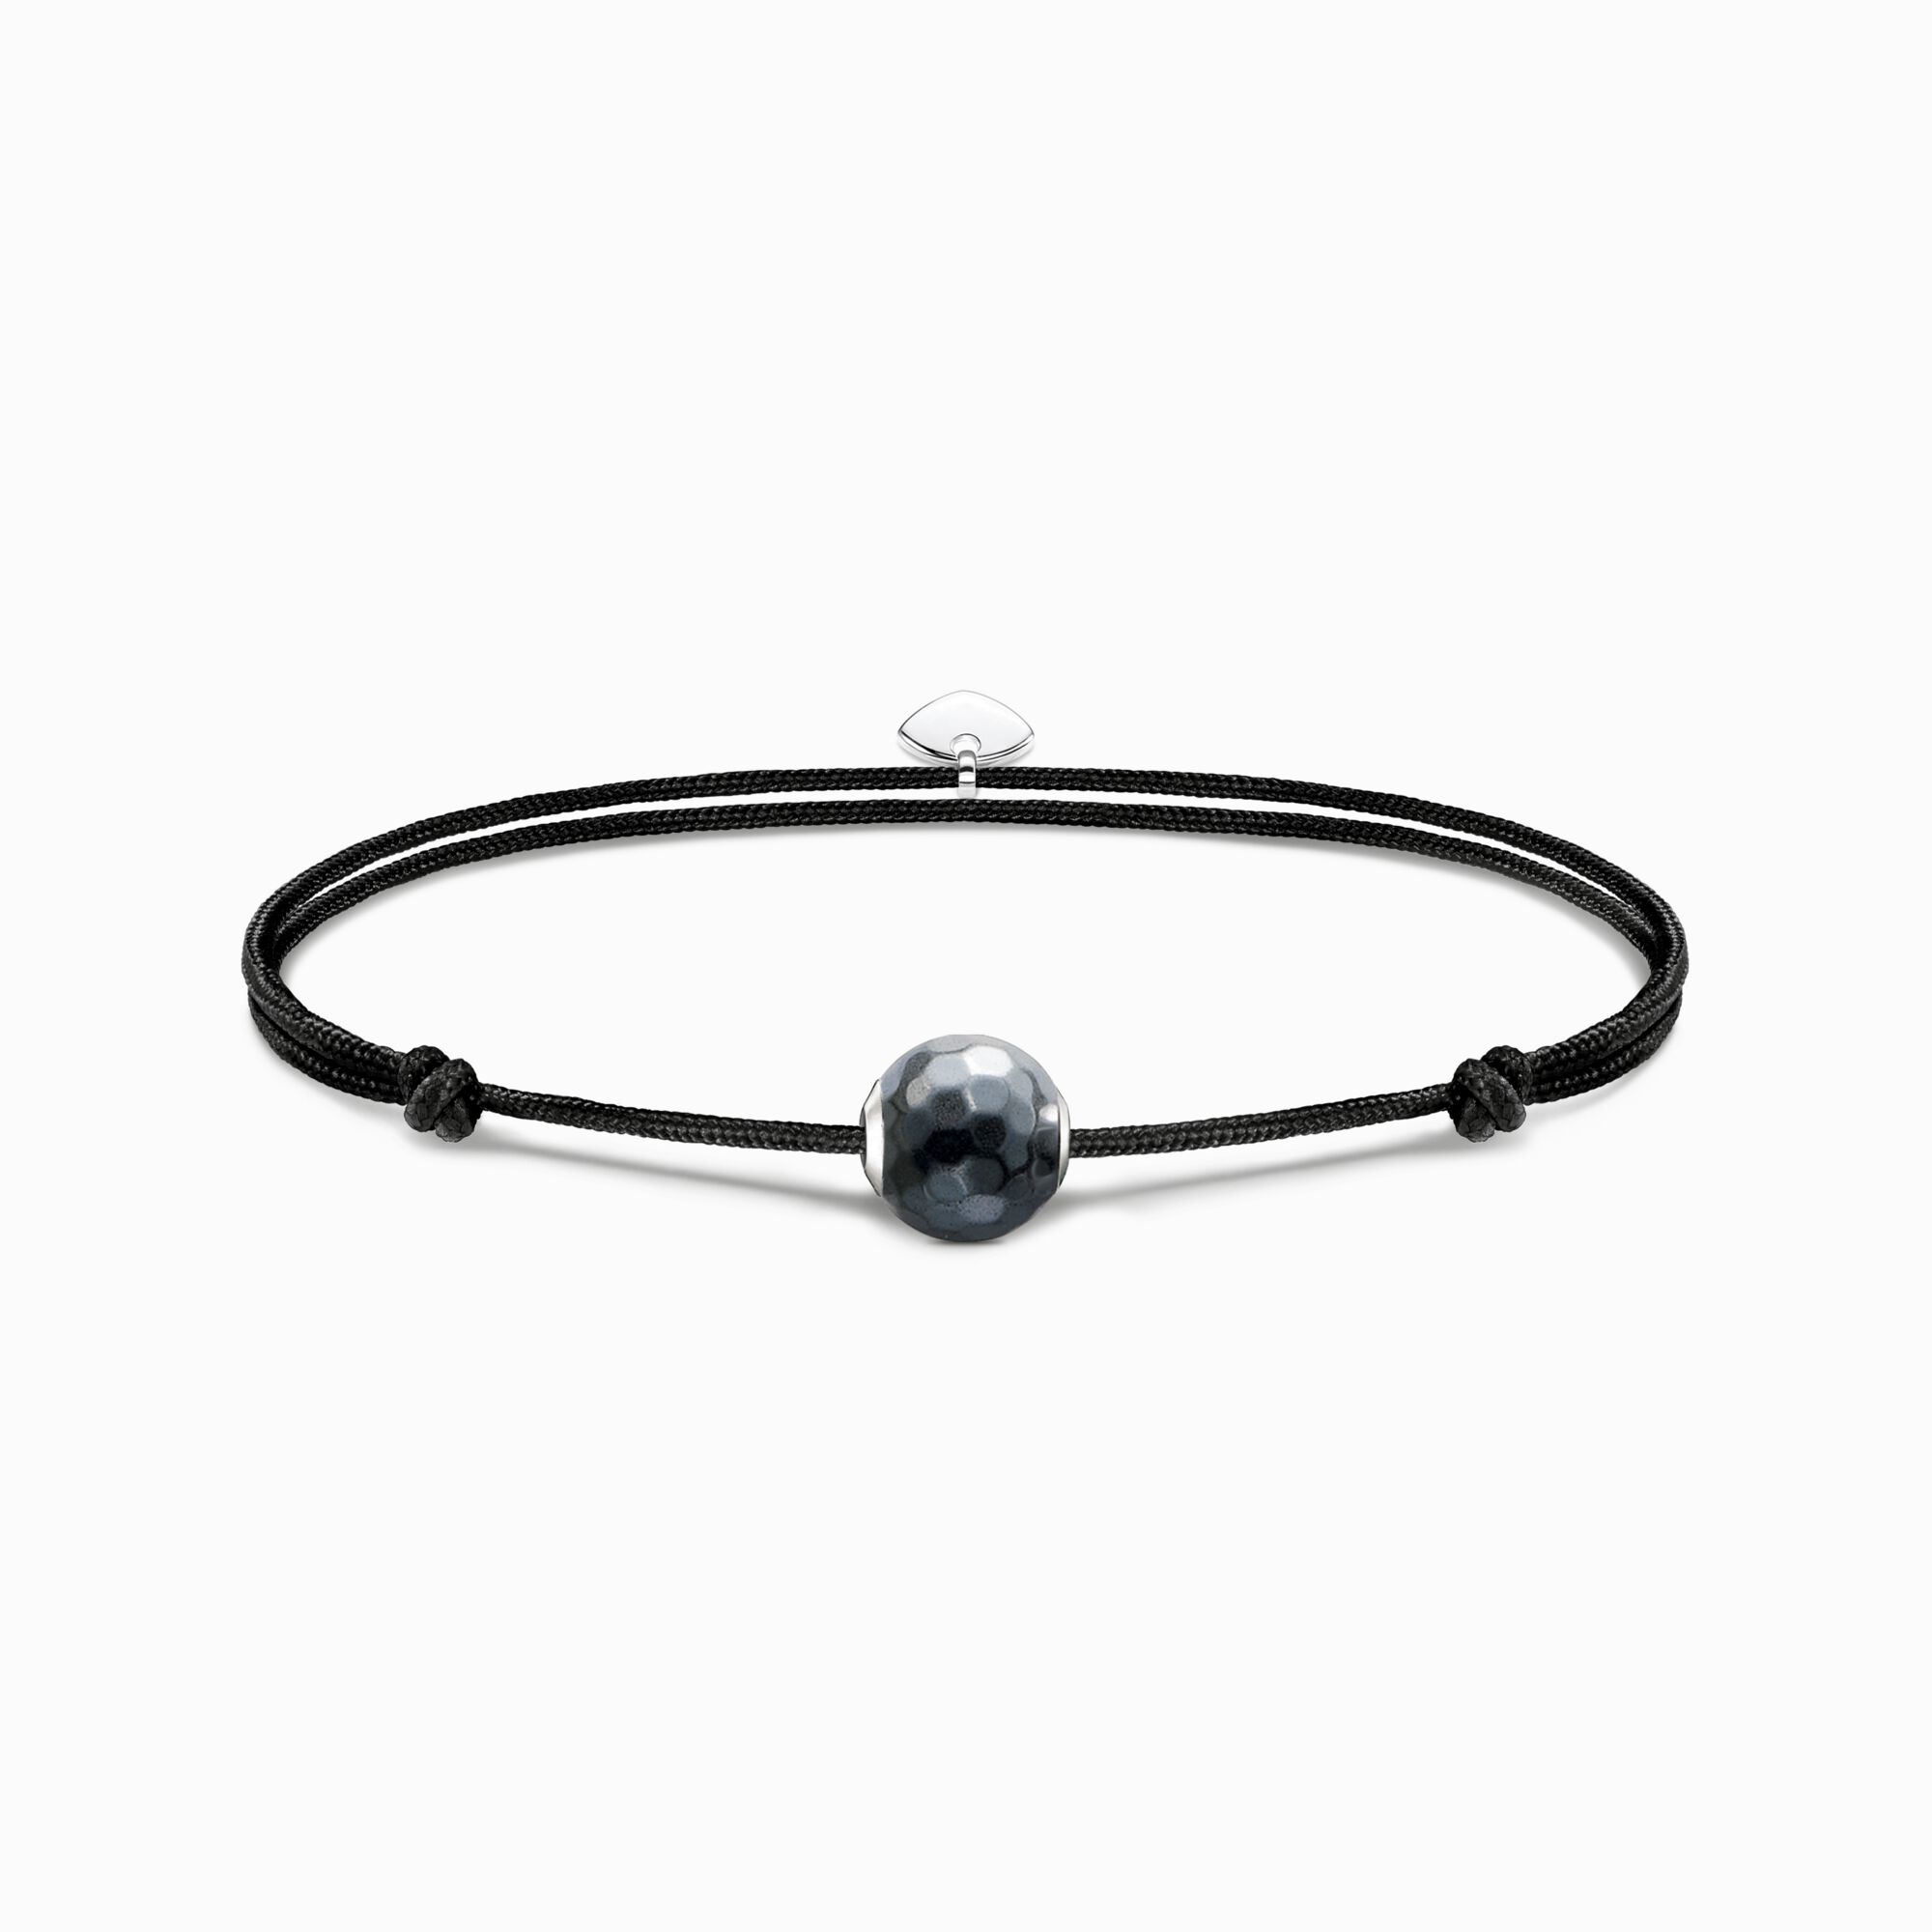 Bracelet Karma Secret with black haematite Bead from the Karma Beads collection in the THOMAS SABO online store